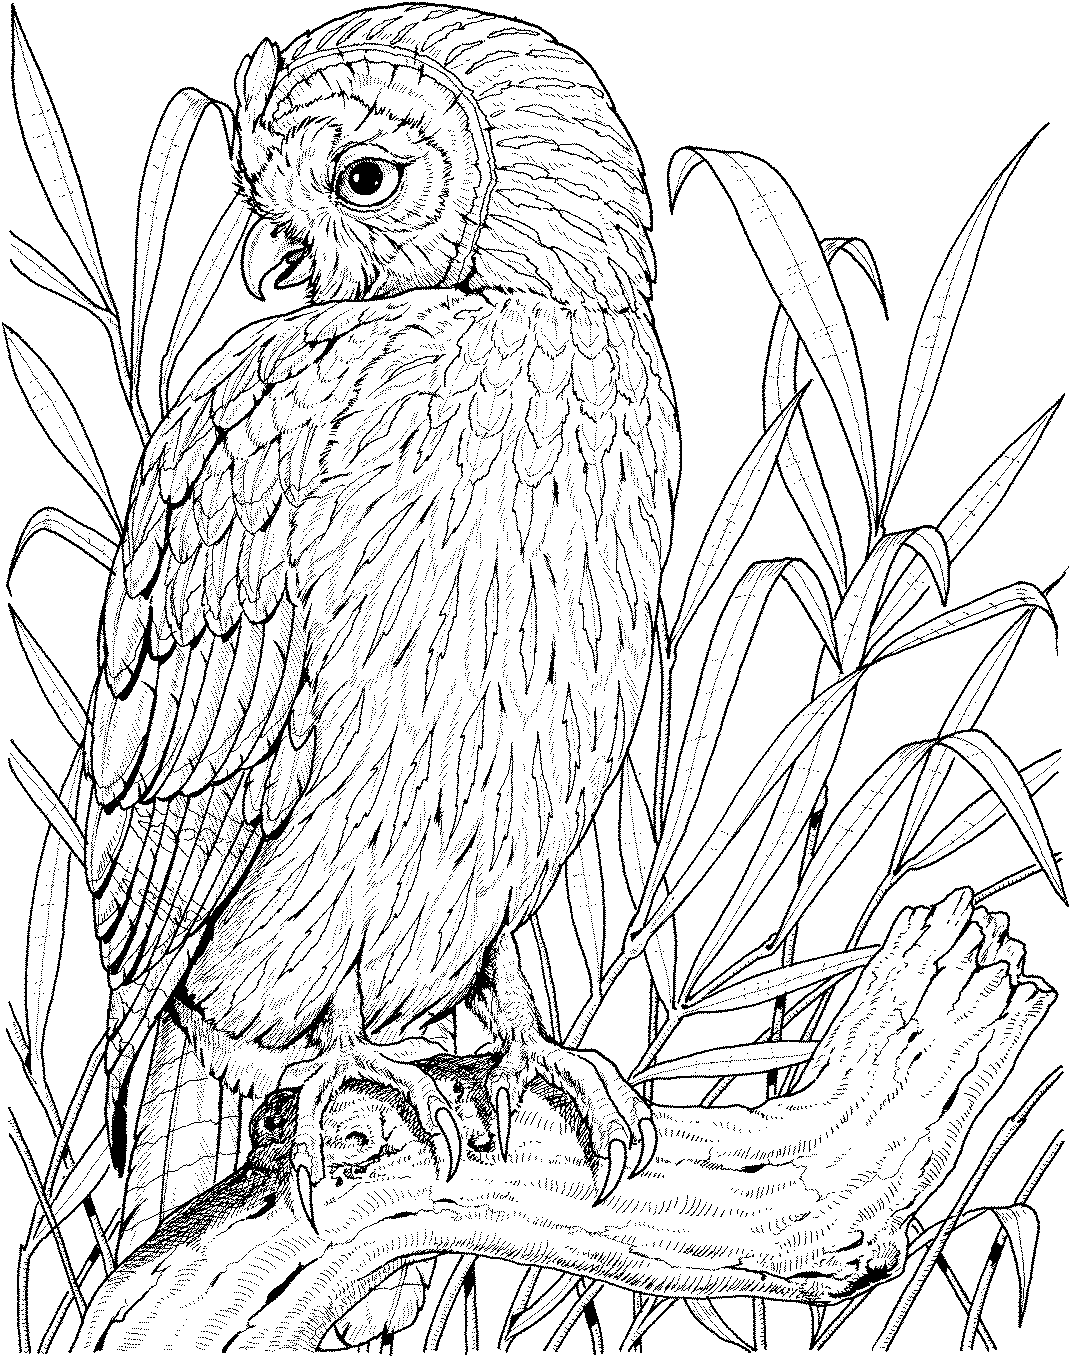 coloring pages for adults with owls adult owl coloring page getcoloringpagescom with pages for owls adults coloring 